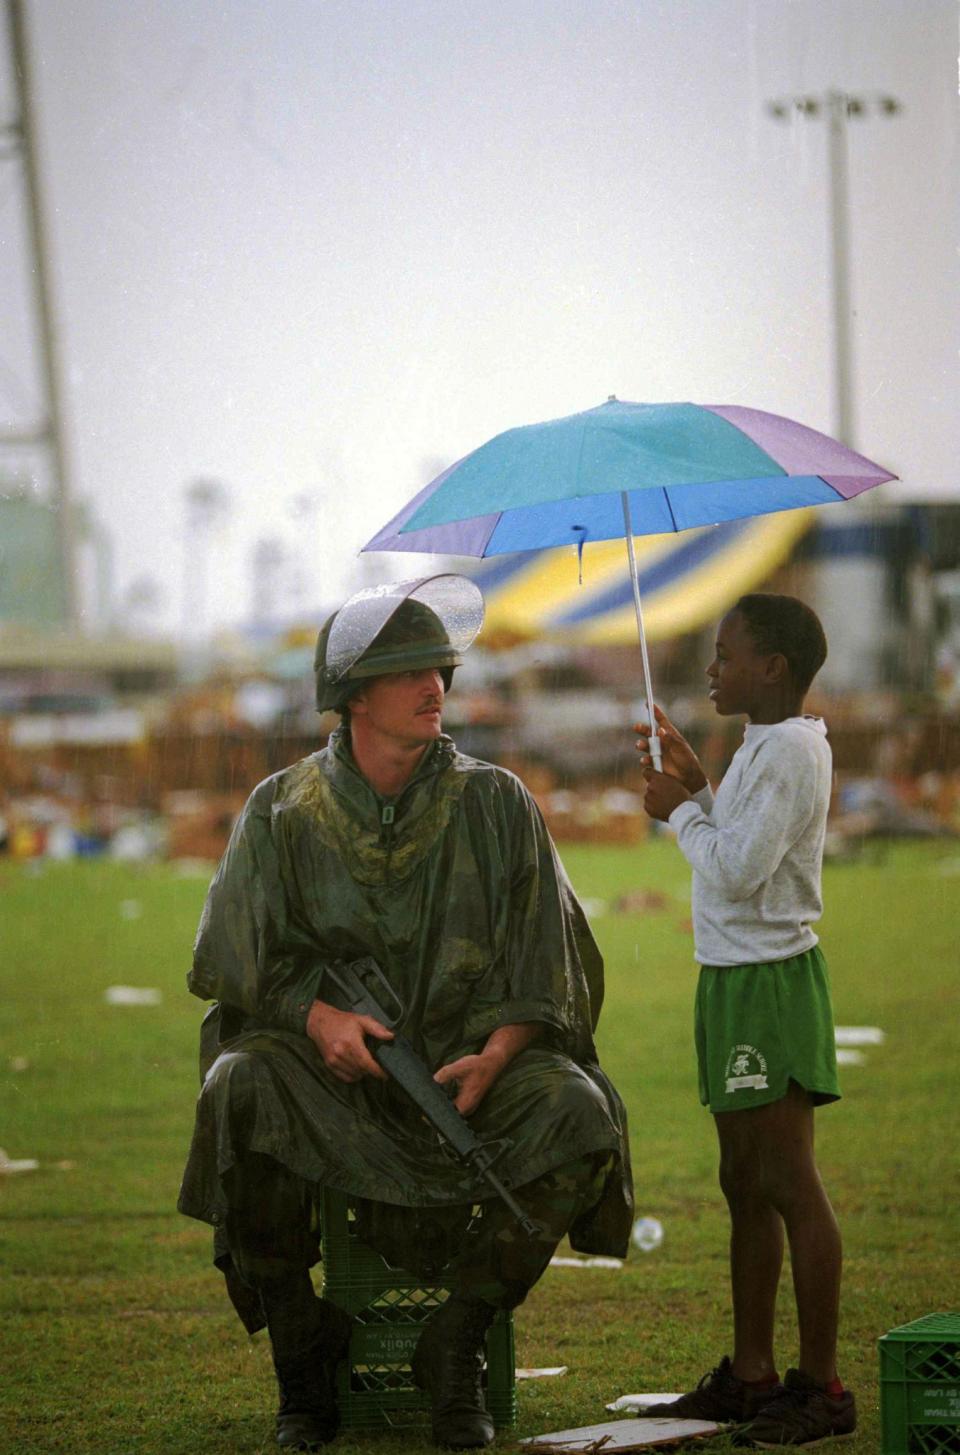 <p>Jerome Mitchell, 10, holds an umbrella as he chats with National Guardsman Toddy Bryan of Palmetto, Fla., at a food and clothing distribution center in Florida City, Fla., Aug. 30, 1992. Food and clothing are being given to victims of Hurricane Andrew. (AP Photo/Lynne Sladky) </p>